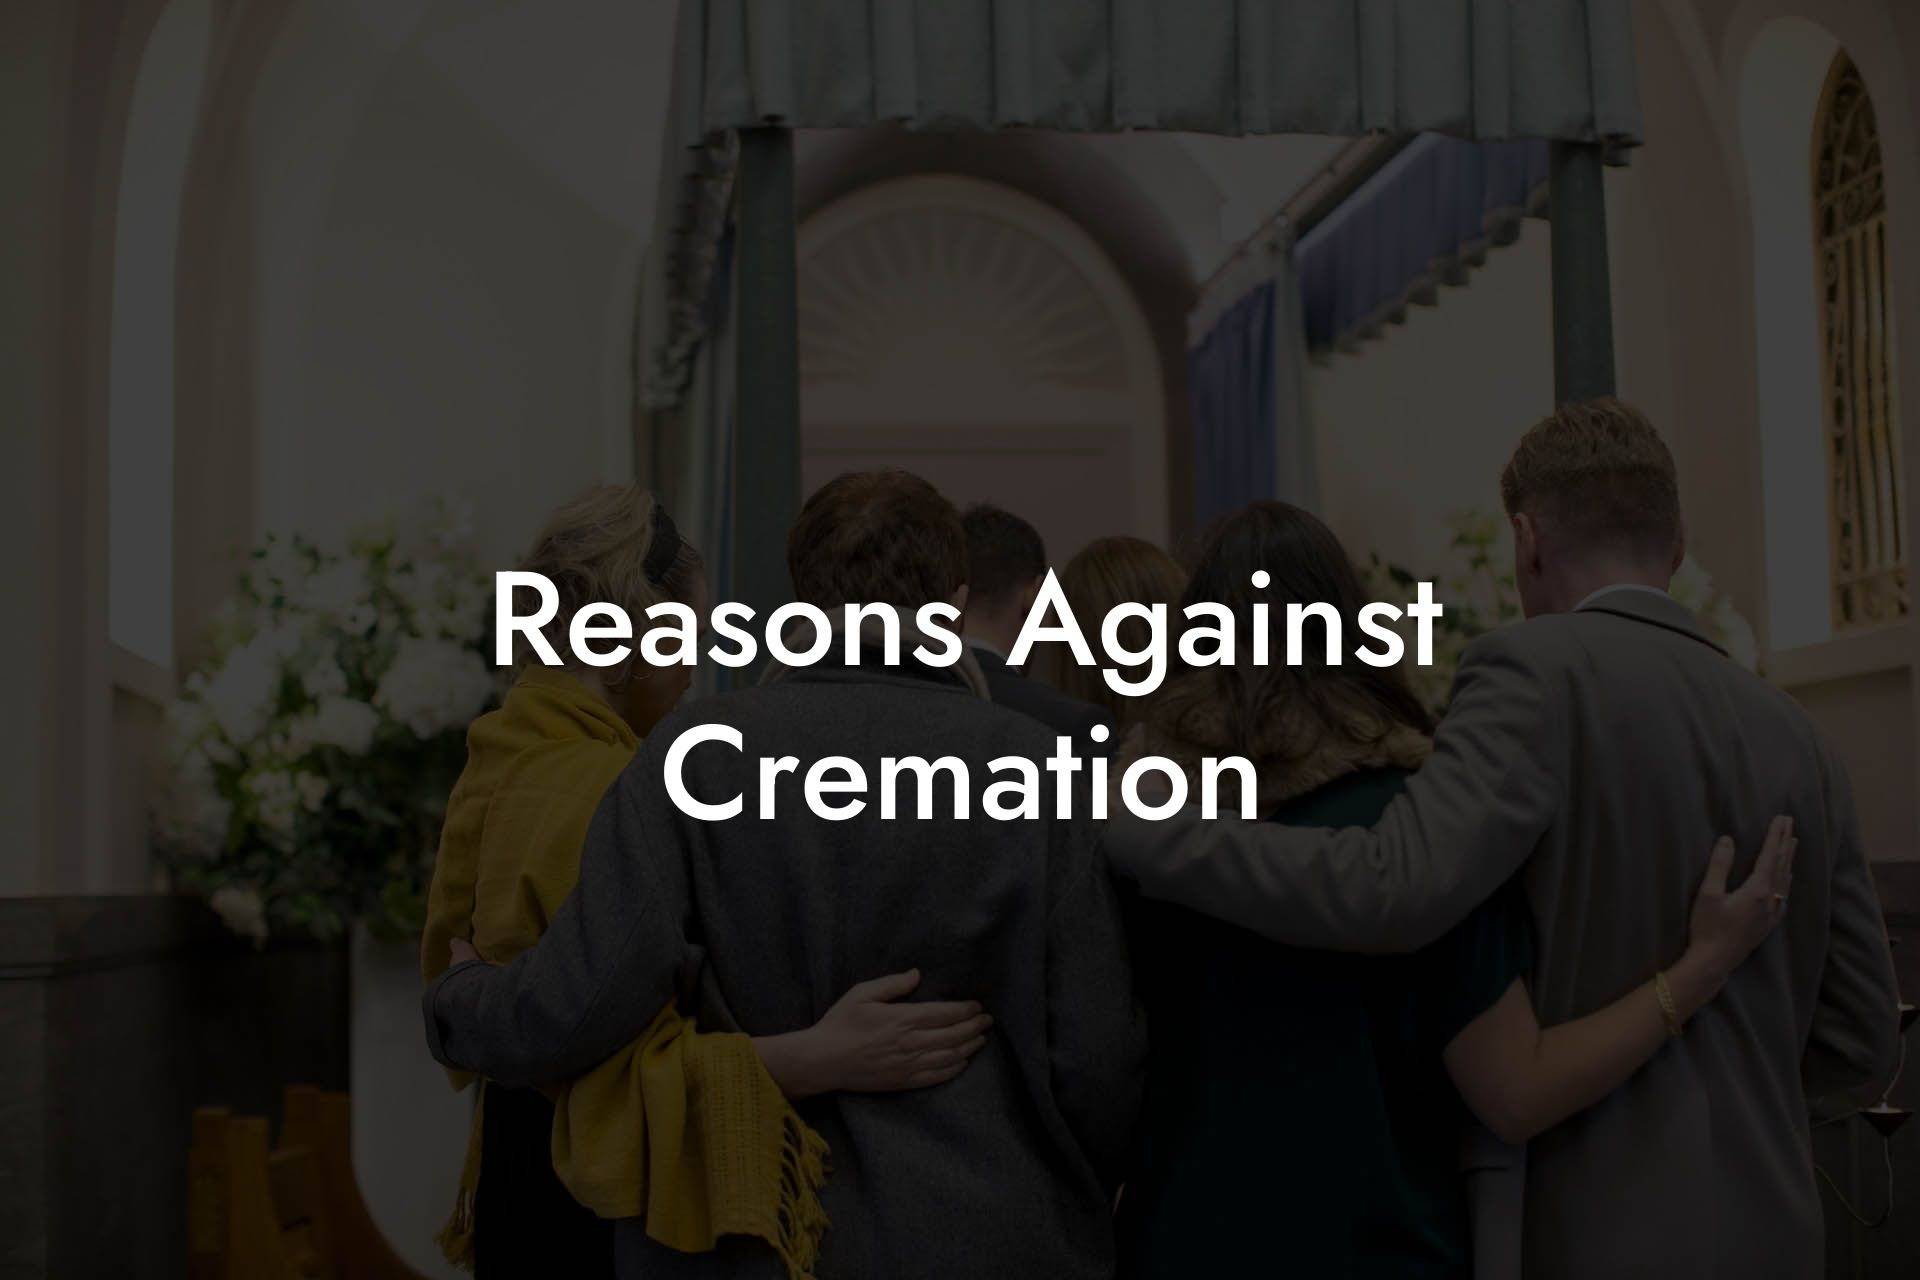 Reasons Against Cremation